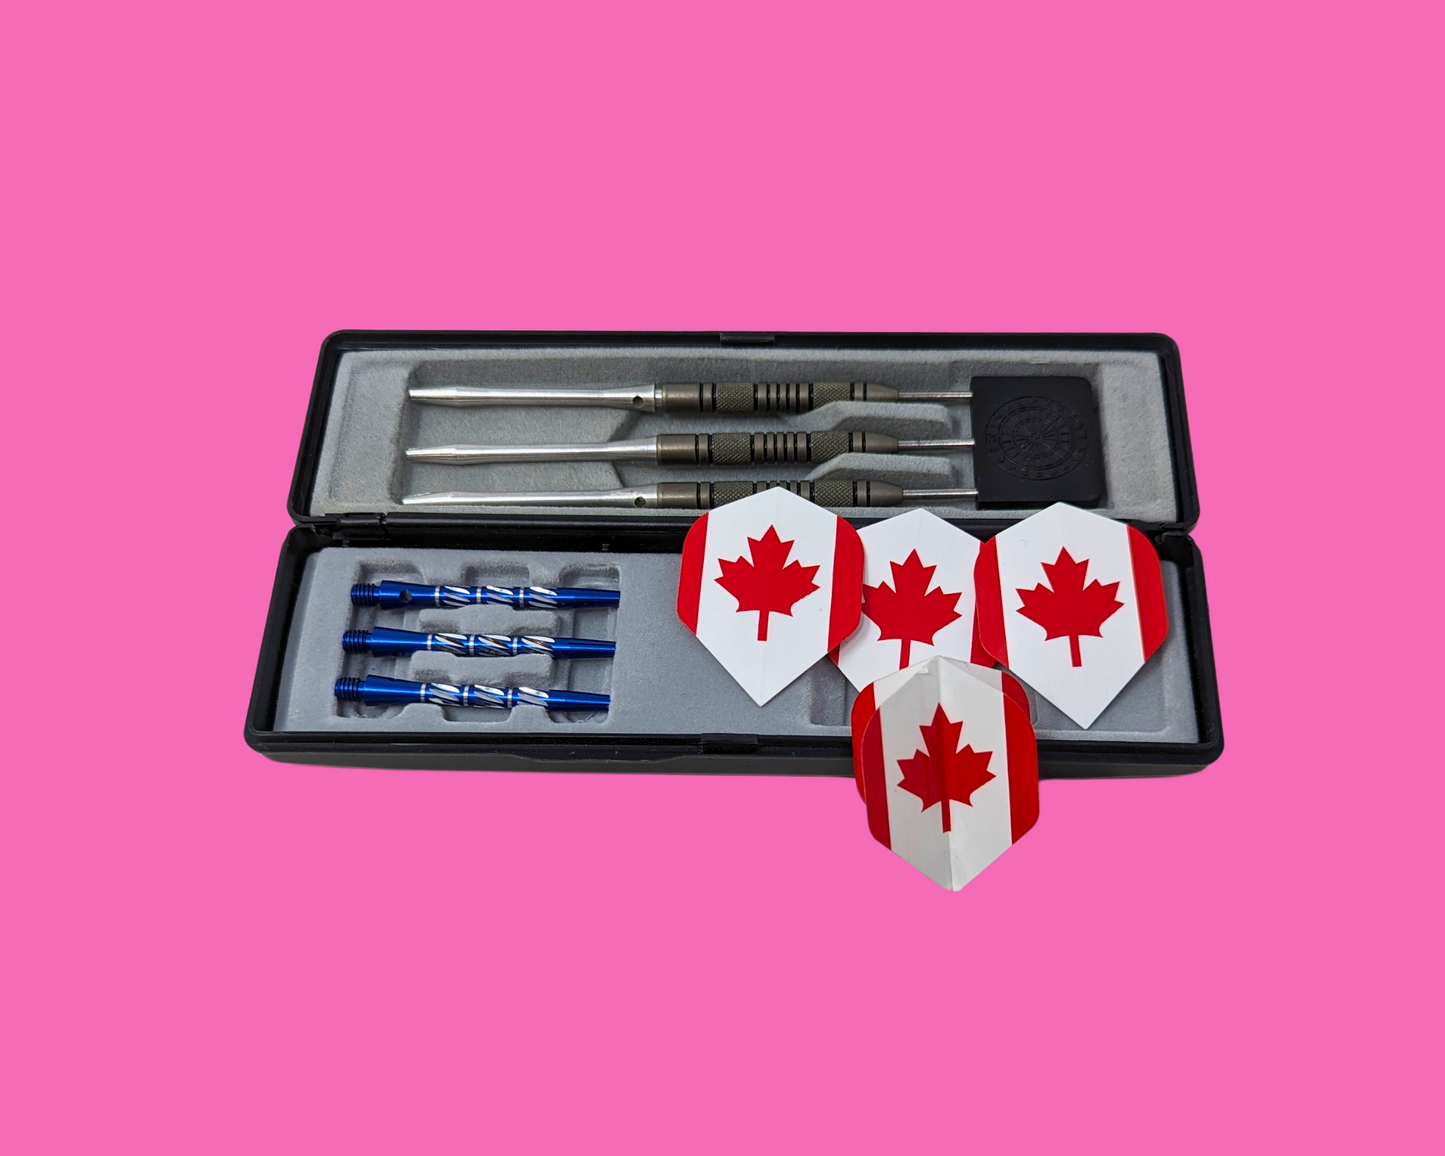 Set of 3 Professional Darts with Canadian Flags